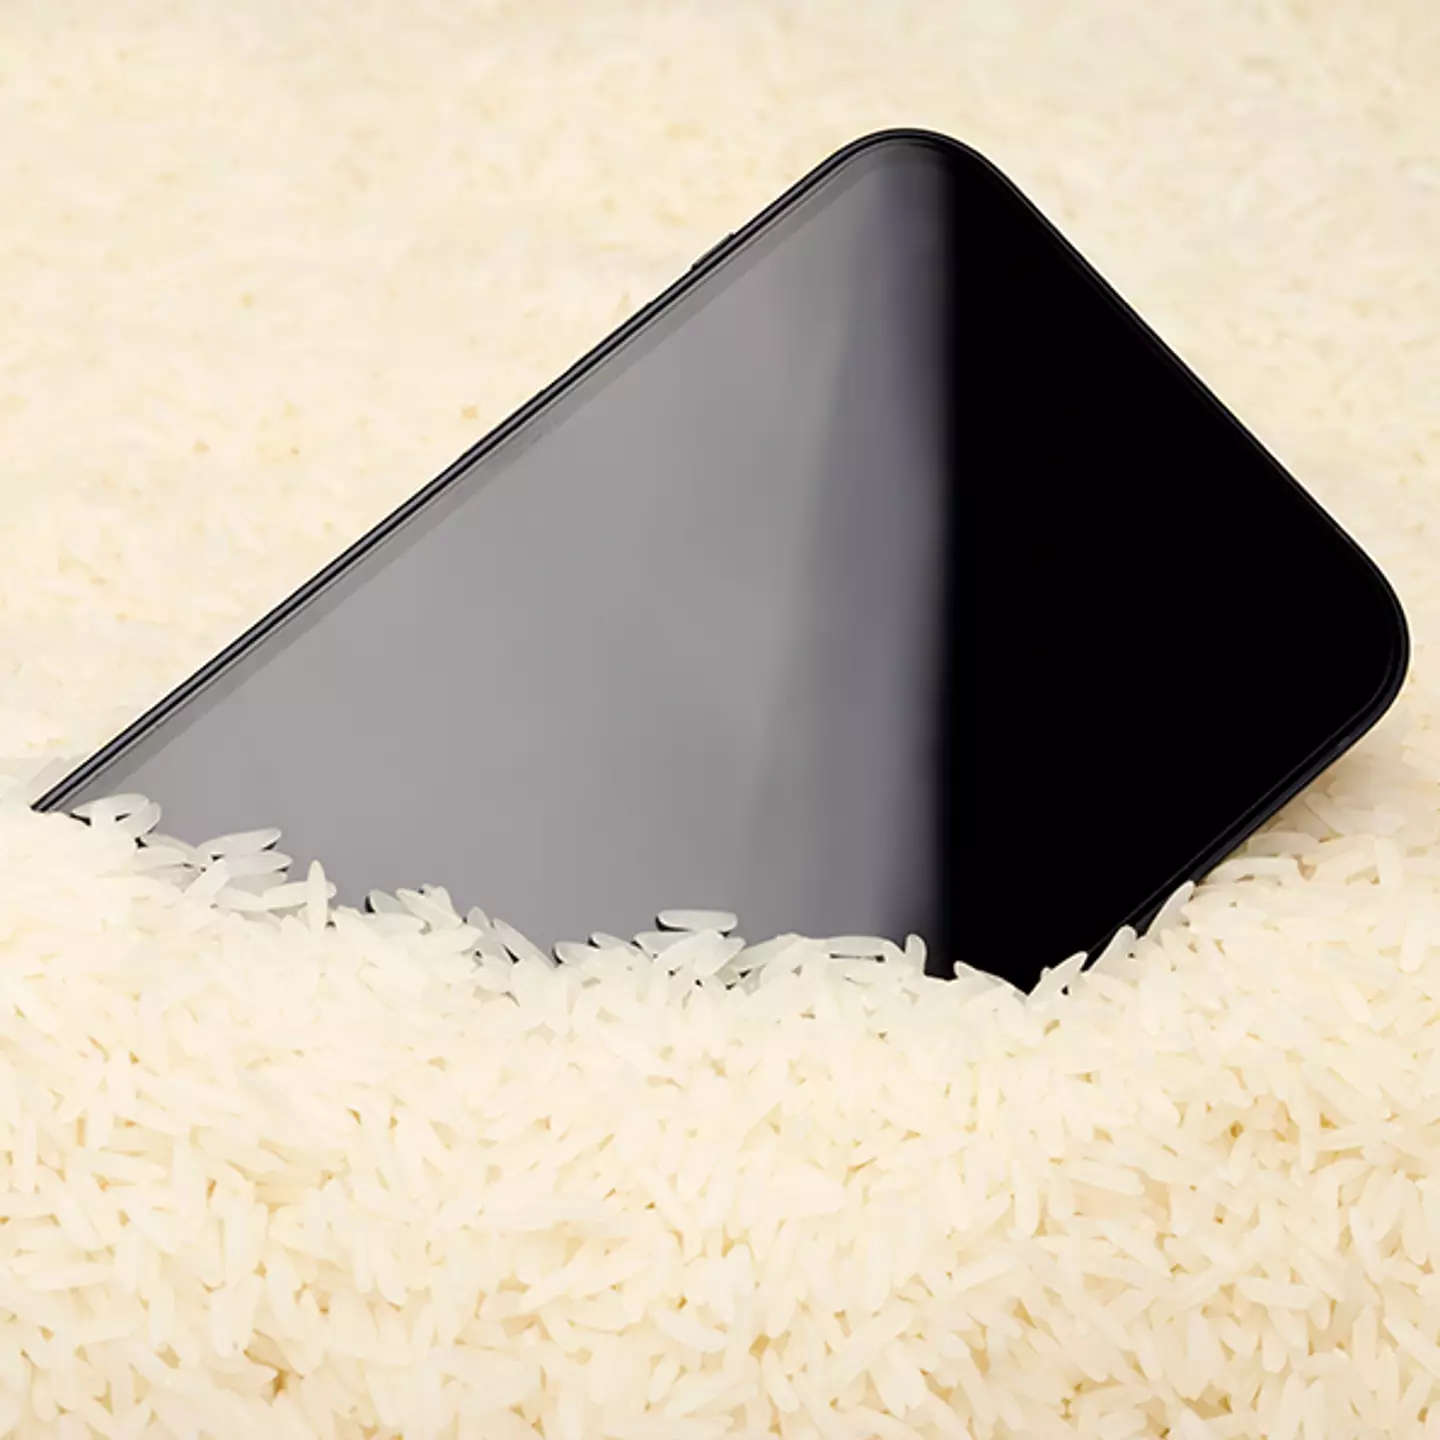 Apple issues official warning against putting phone in rice